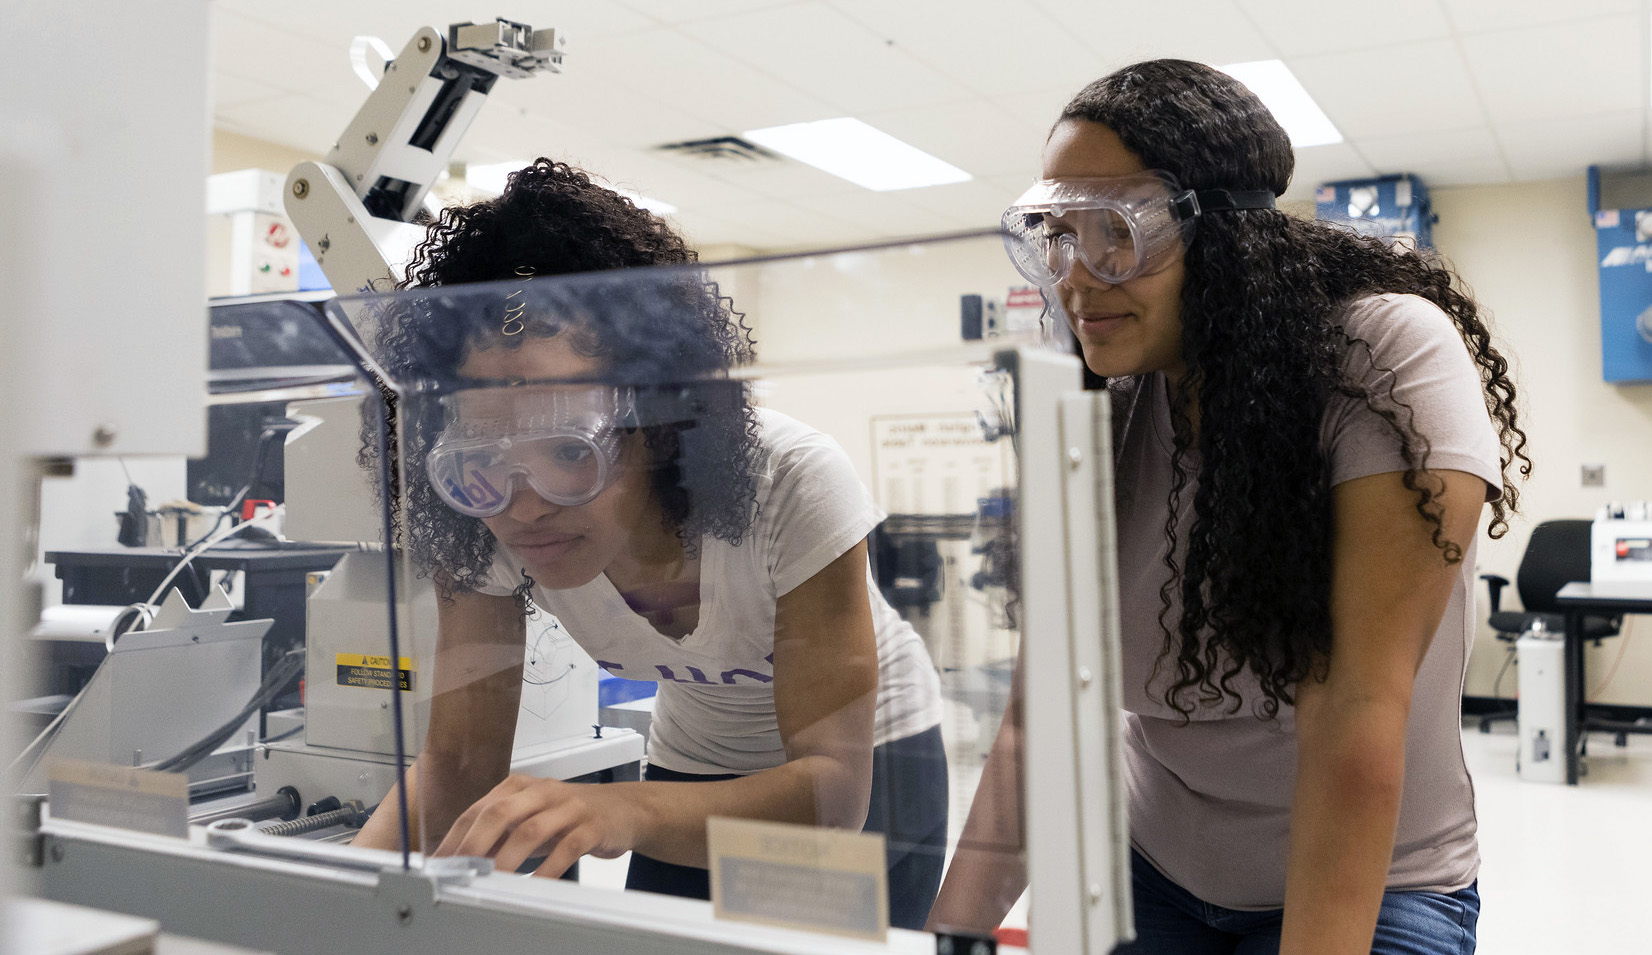 Two female engineering students wear googles and investigate something in the lab.